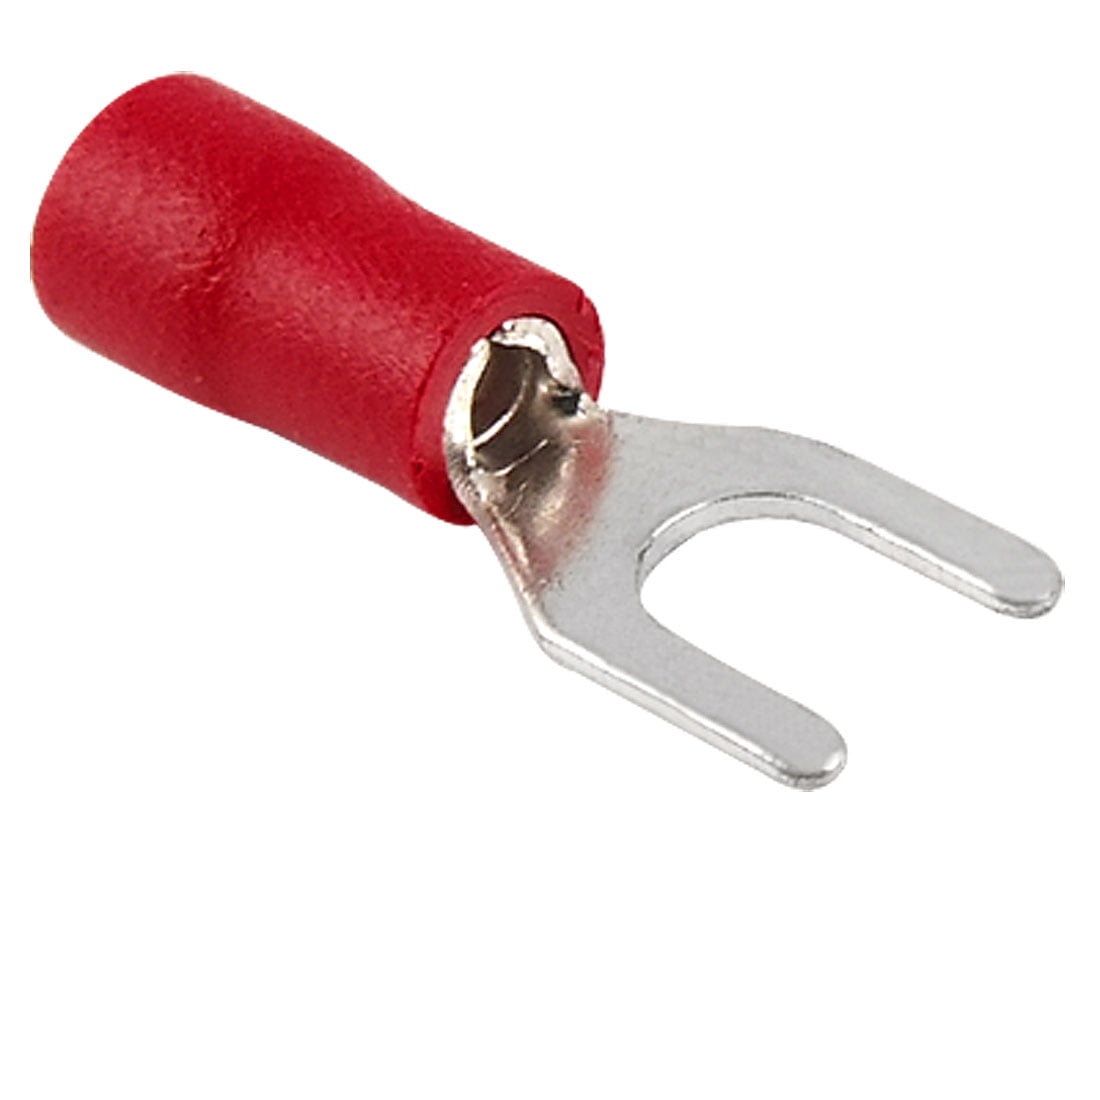 RED FULLY INSULATED ELECTRICAL FORK CRIMP CONNECTORS Varied Sizes Male Terminal 